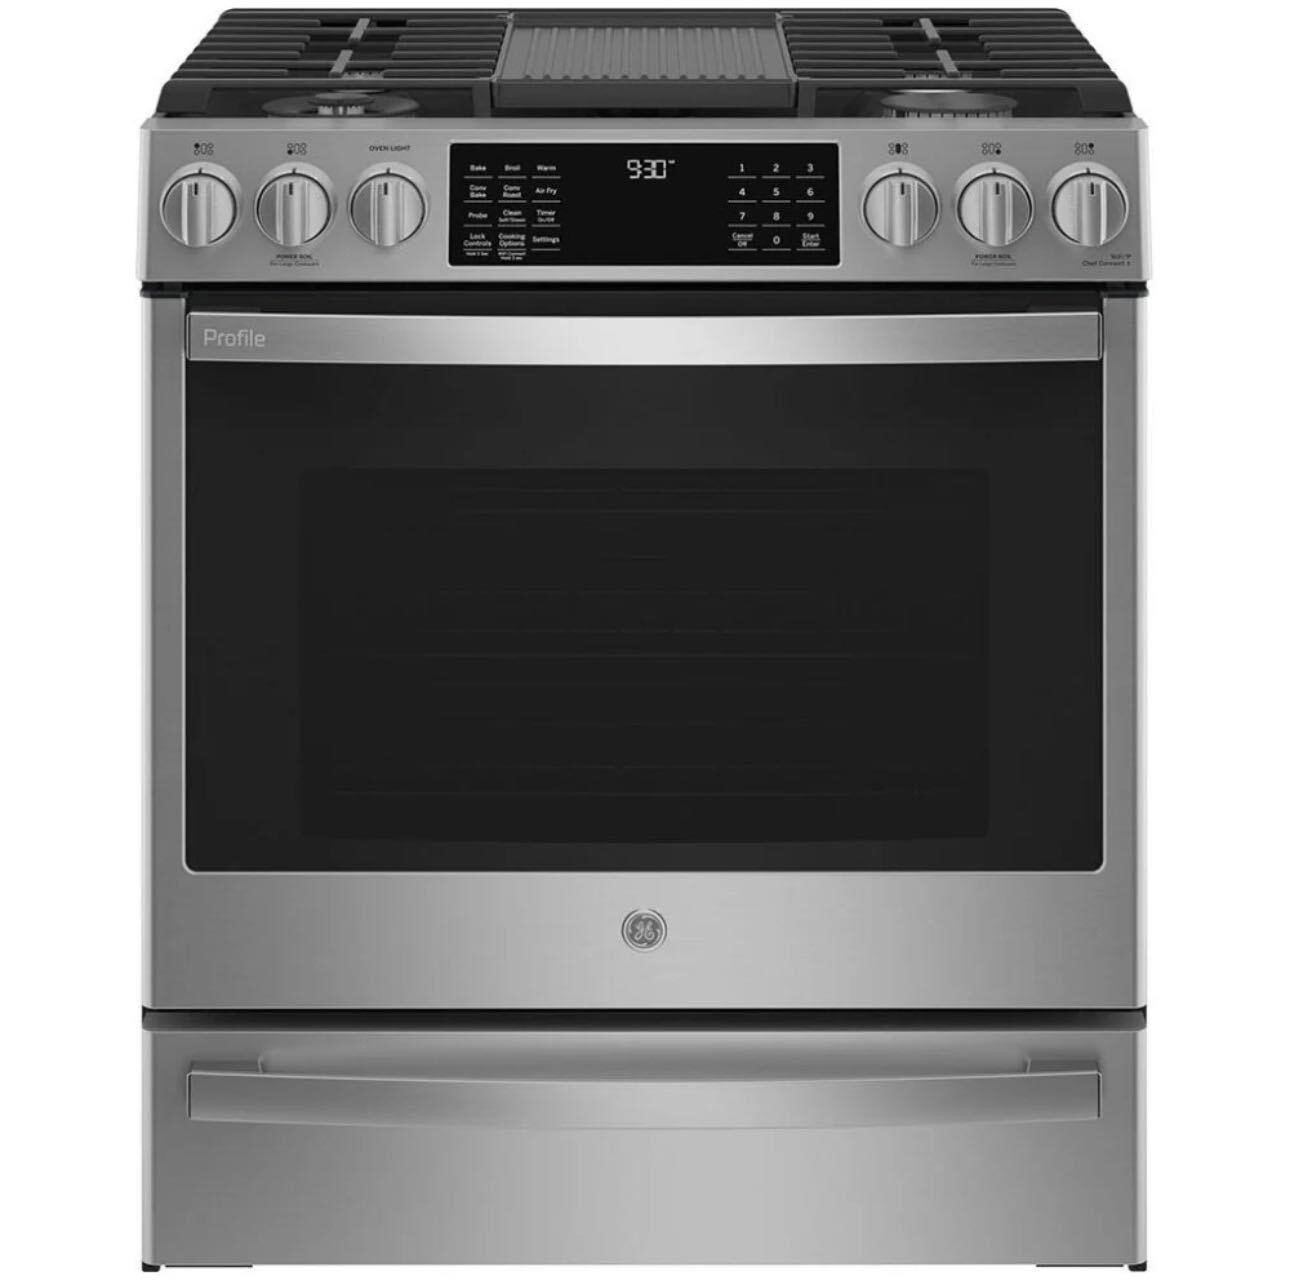 GE Profile 30" Slide-In Convection Gas Range wi...